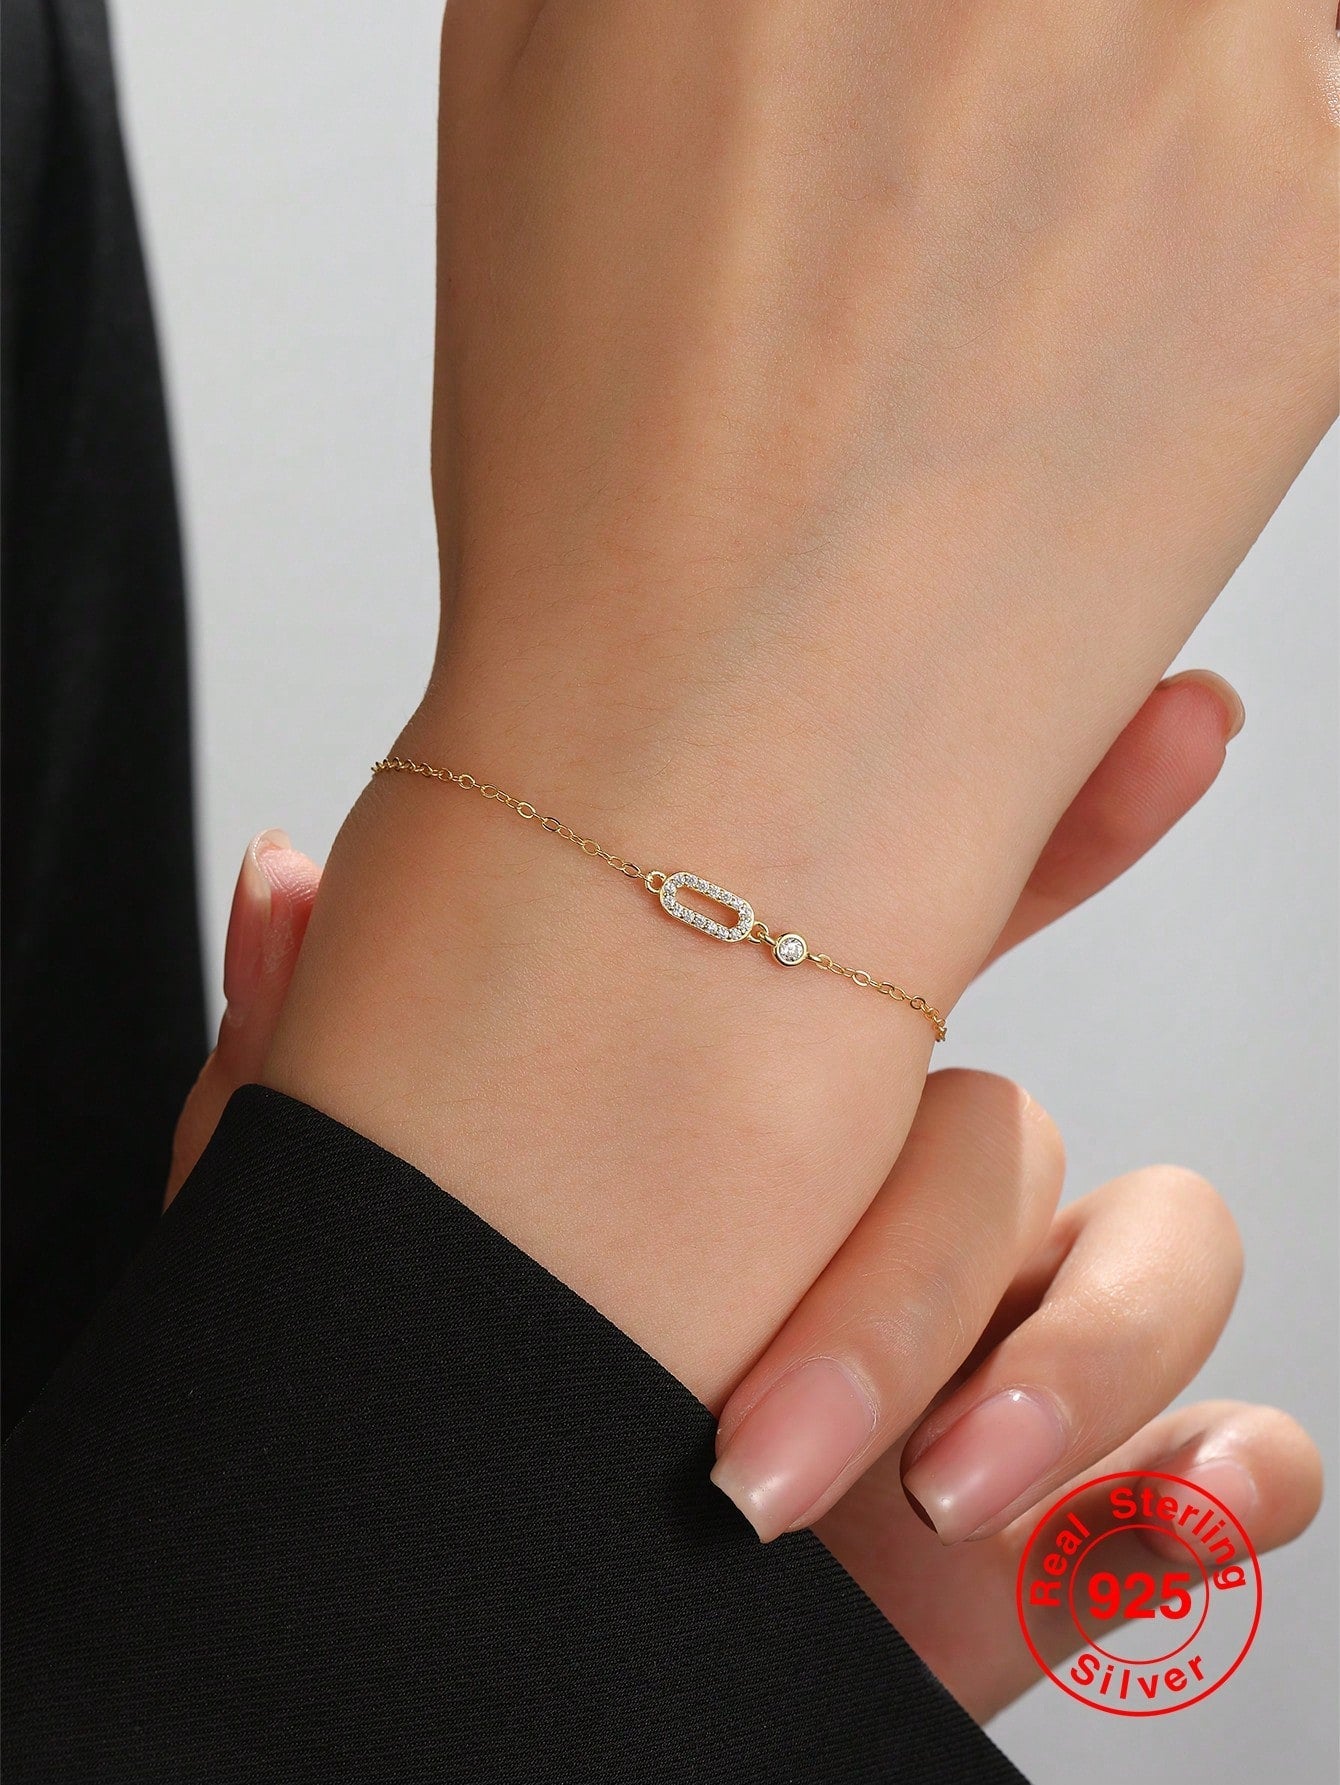 1pc Pure Silver (s925) Gold Plated Geometric Design Decorated Women's Bracelet - Fashionable, Simple & Versatile Ladies' Jewelry Gift - Negative Apparel